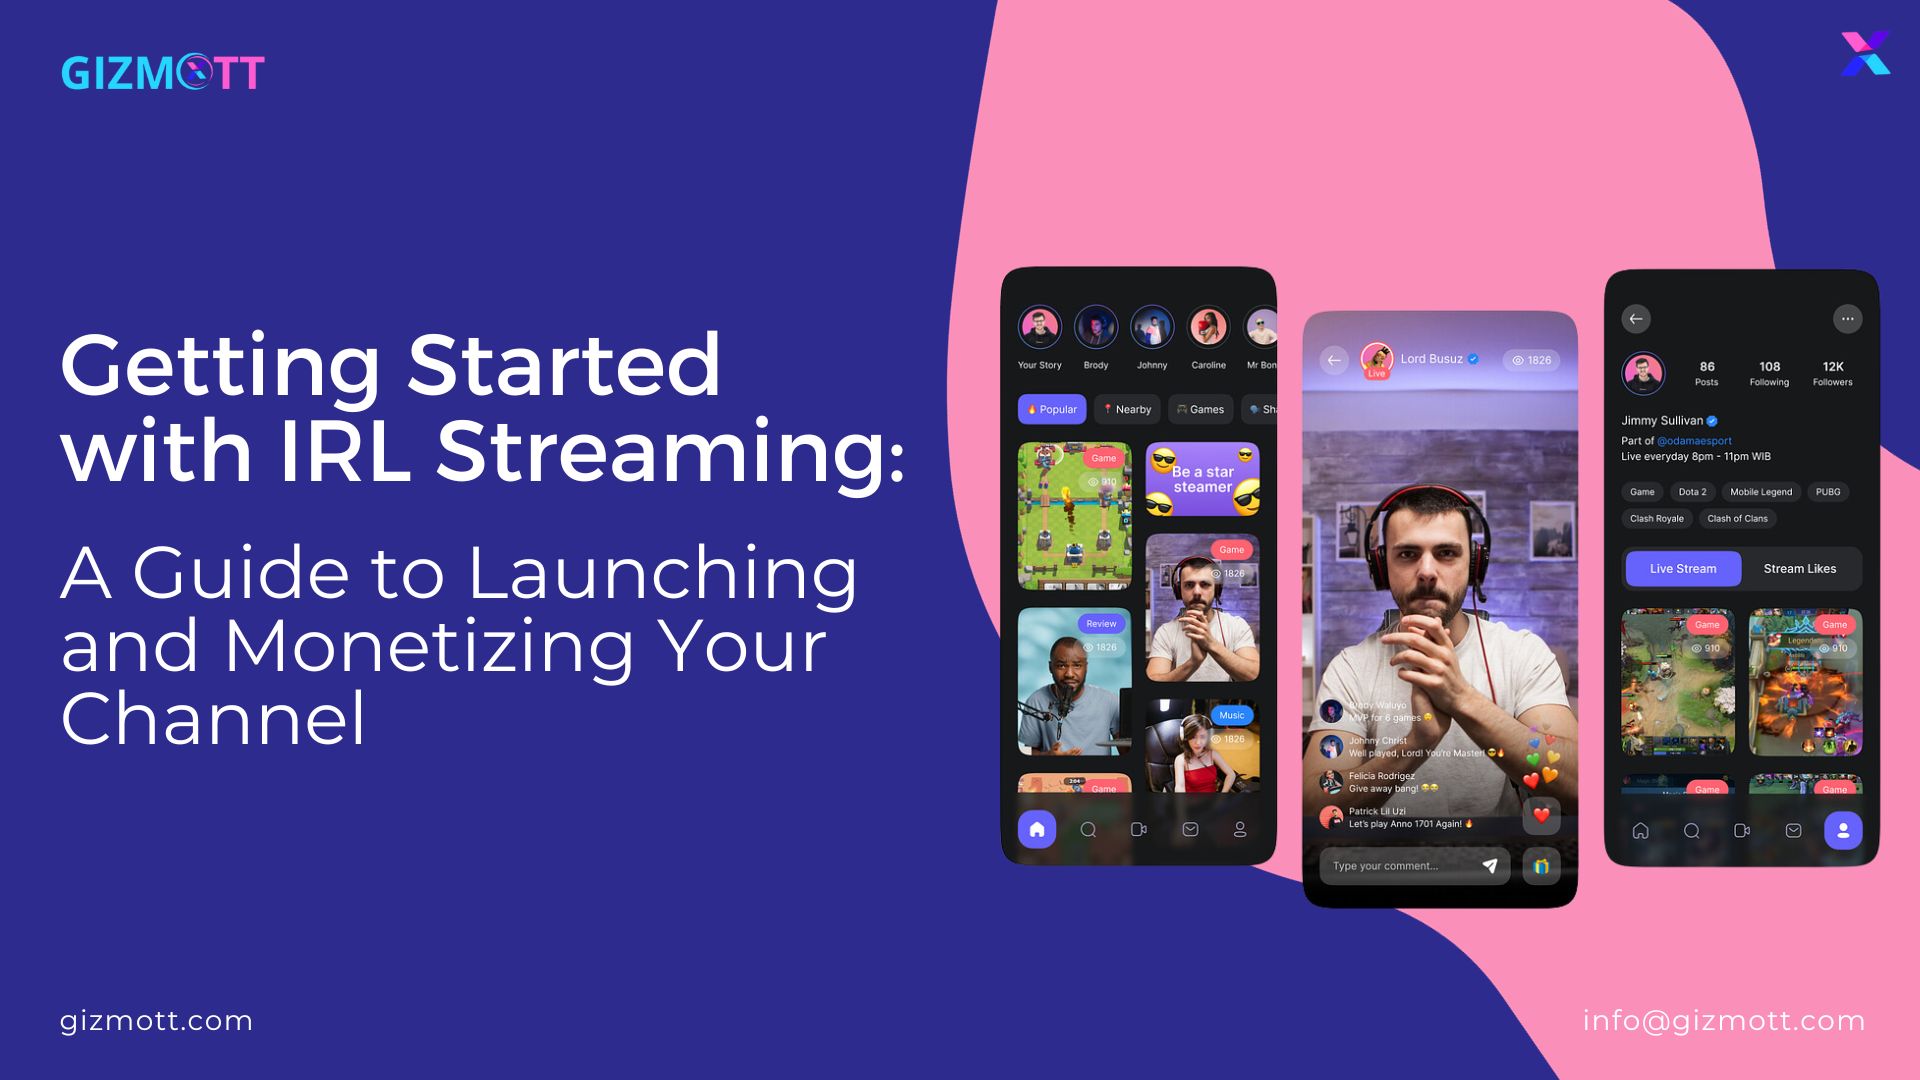 Getting Started with IRL Streaming: A Guide to Launching and Monetizing Your Channel